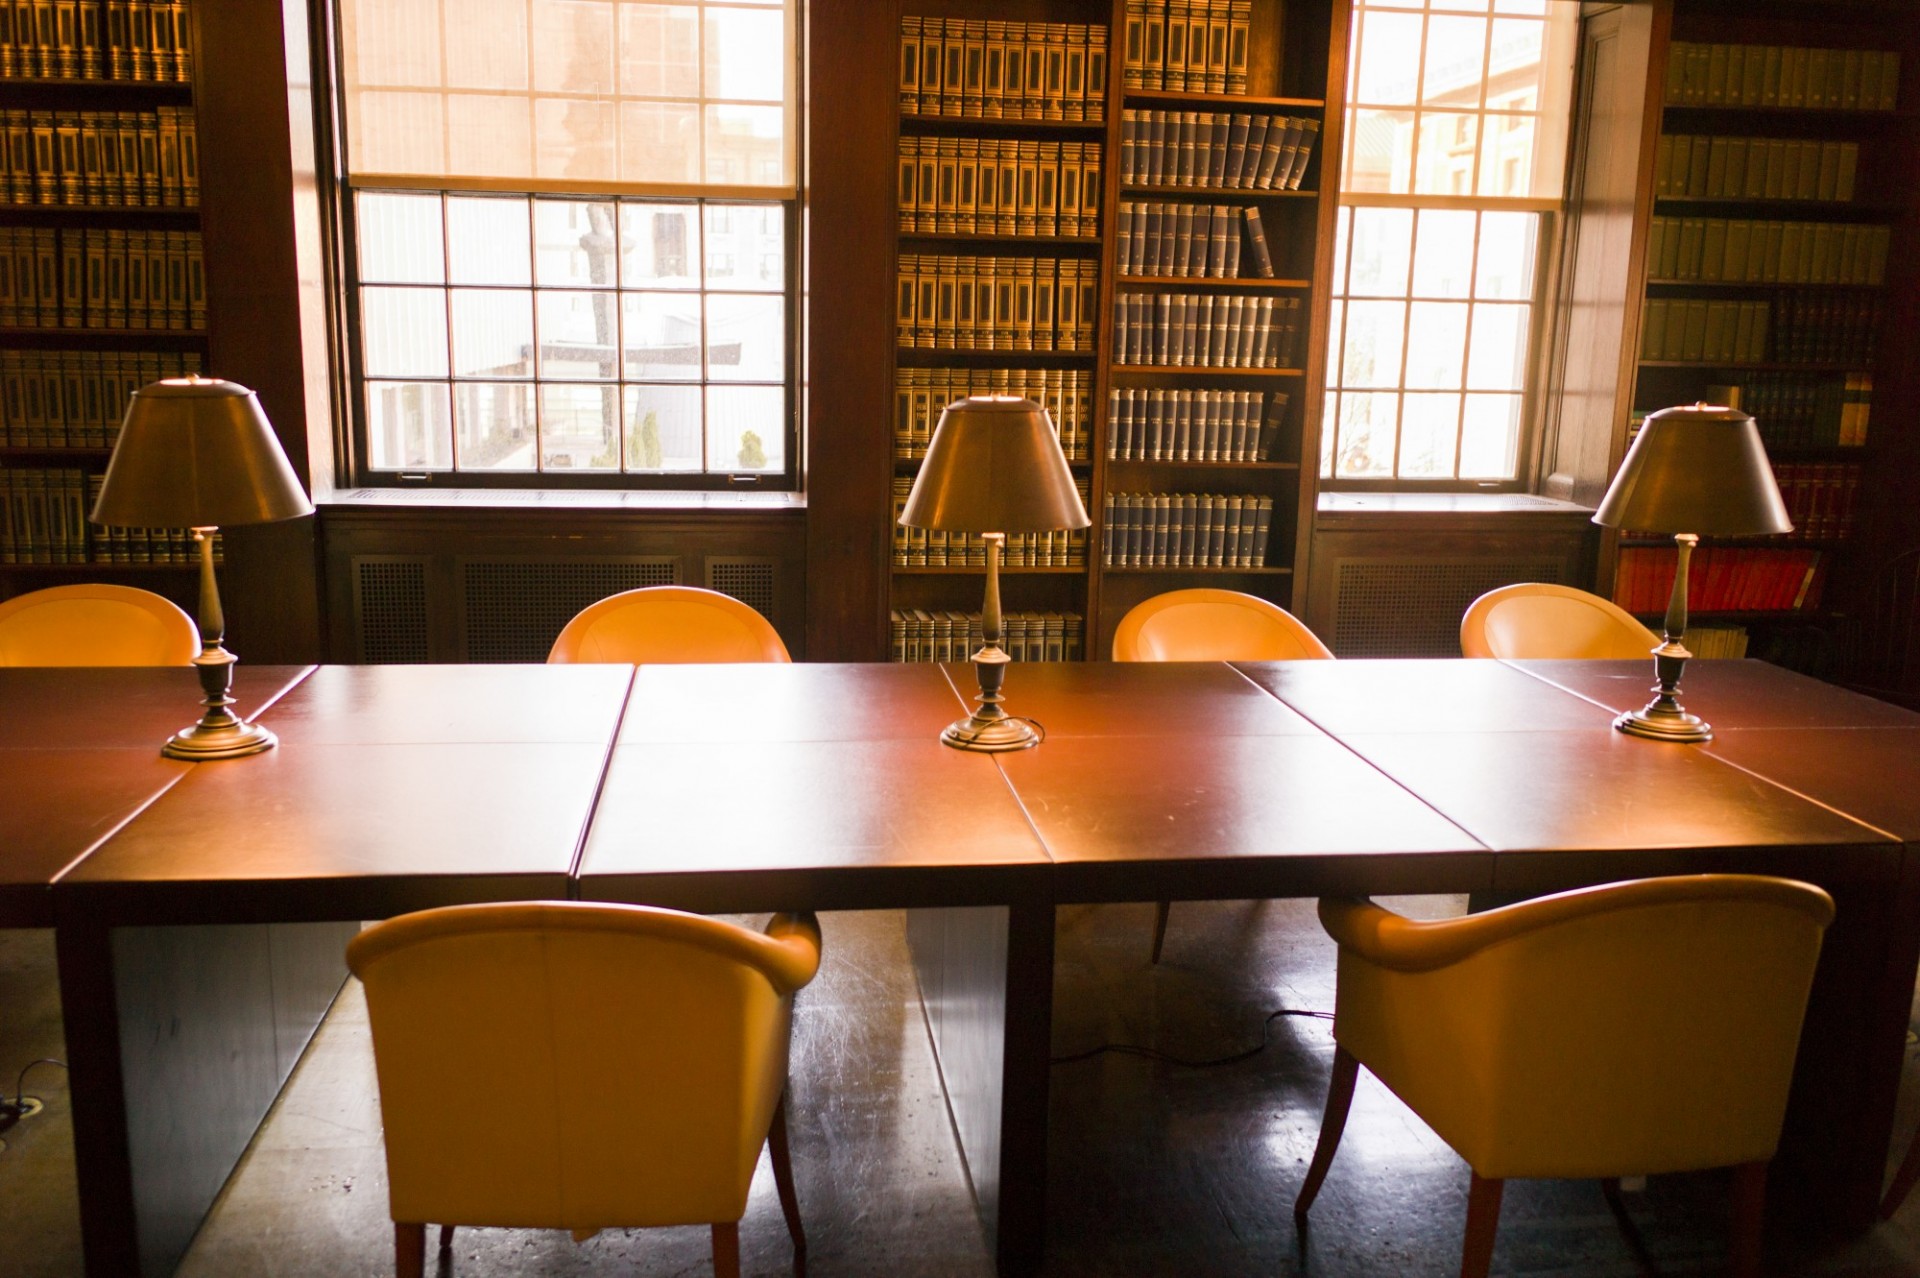 Library conference table